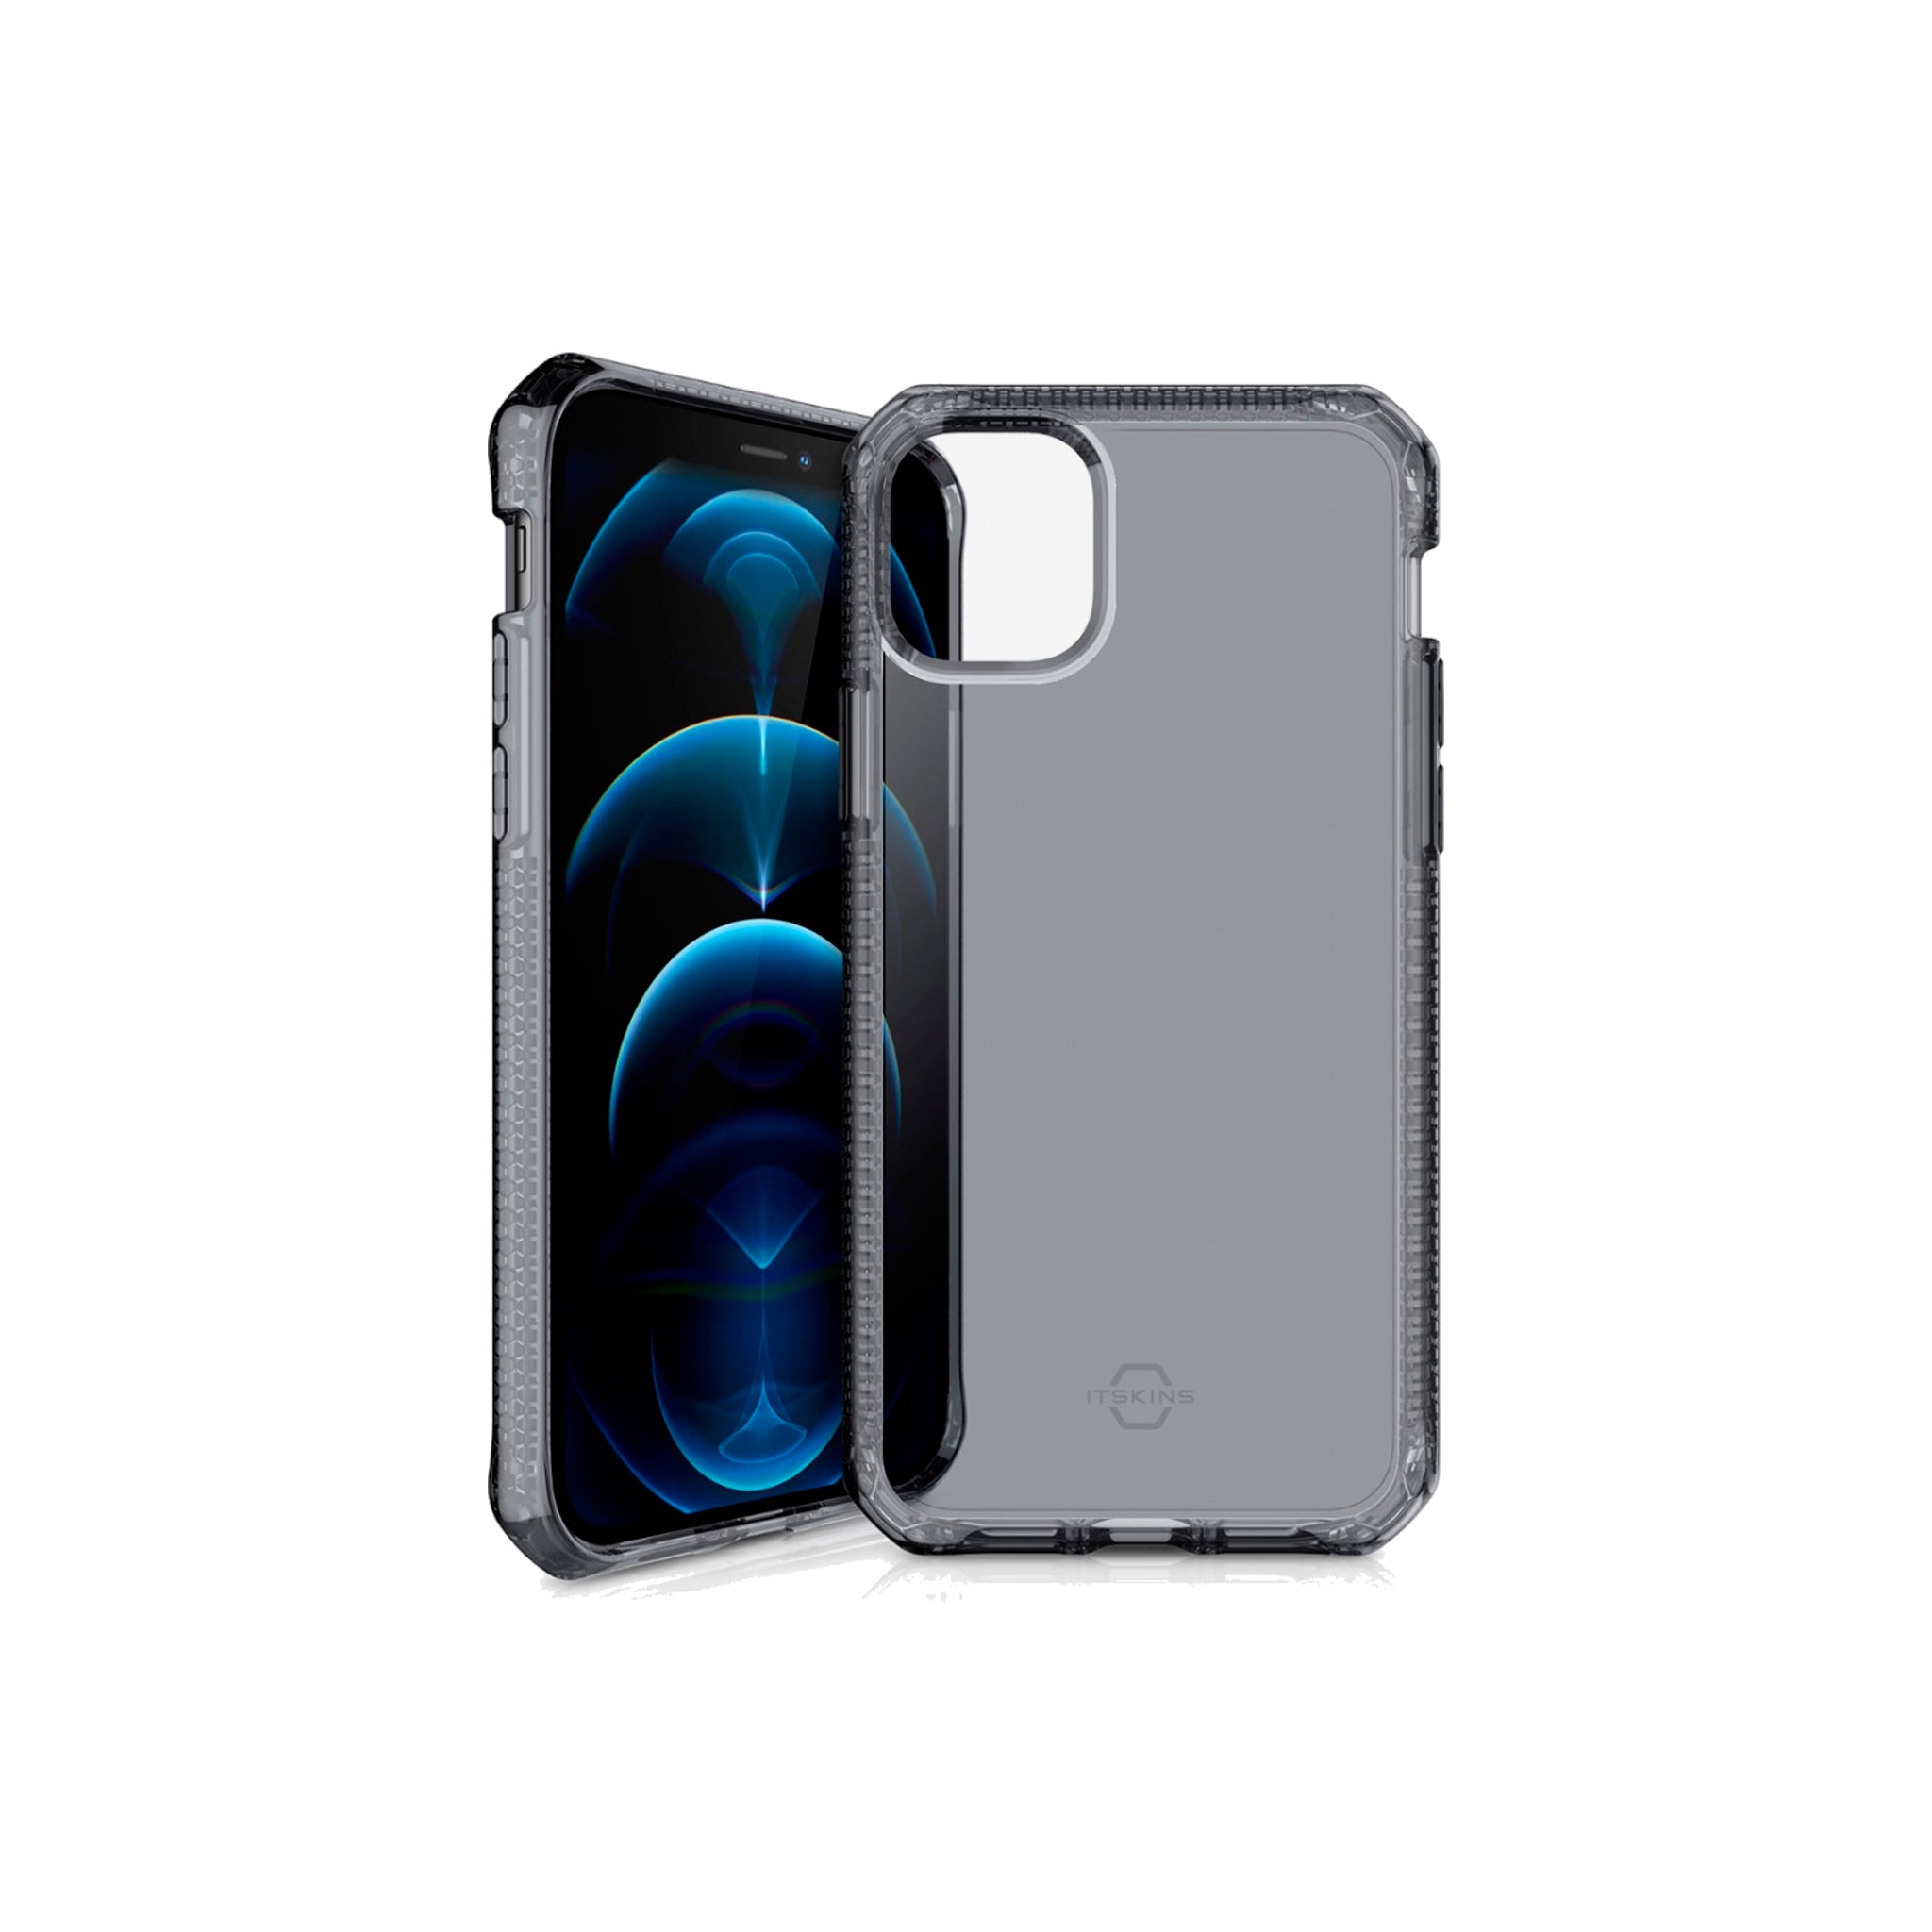 Itskins - Spectrum Clear Case For Apple Iphone 12 Pro Max - Smoke